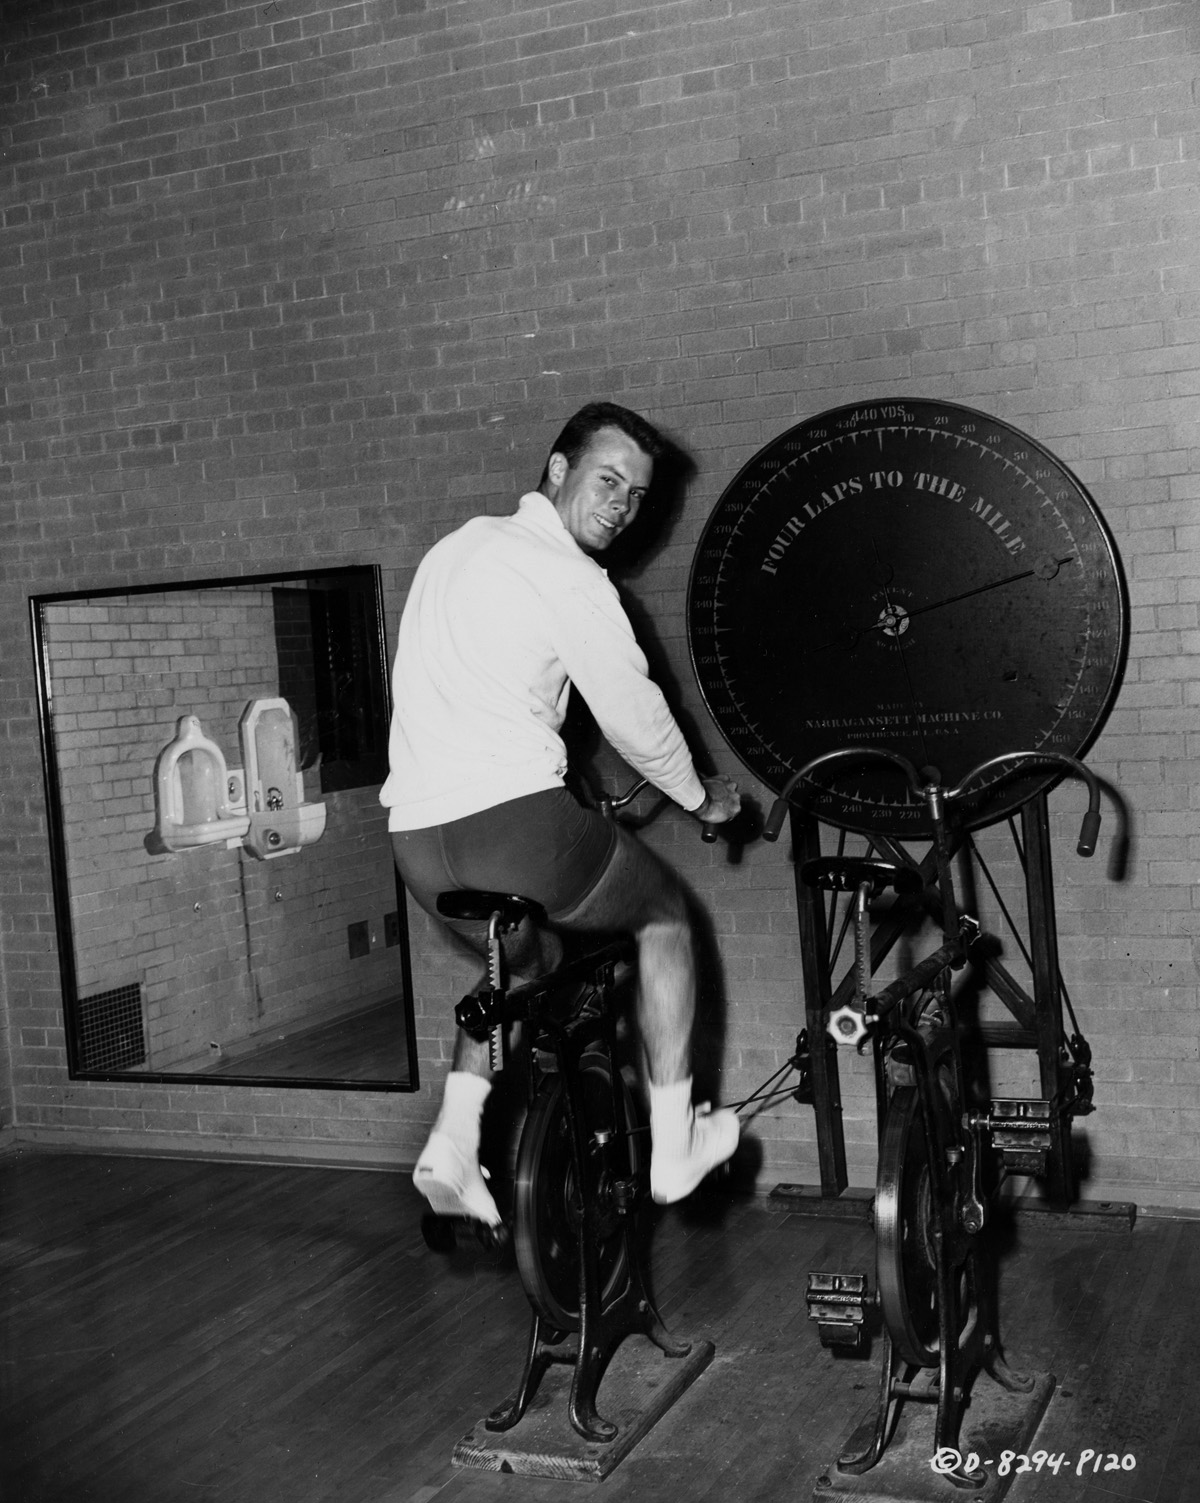  Publicity Photo, Columbia Pictures, West Point, 1954 “ATHLETE - Bob Francis makes use of the cadet gym facilities while on location at West Point….” 